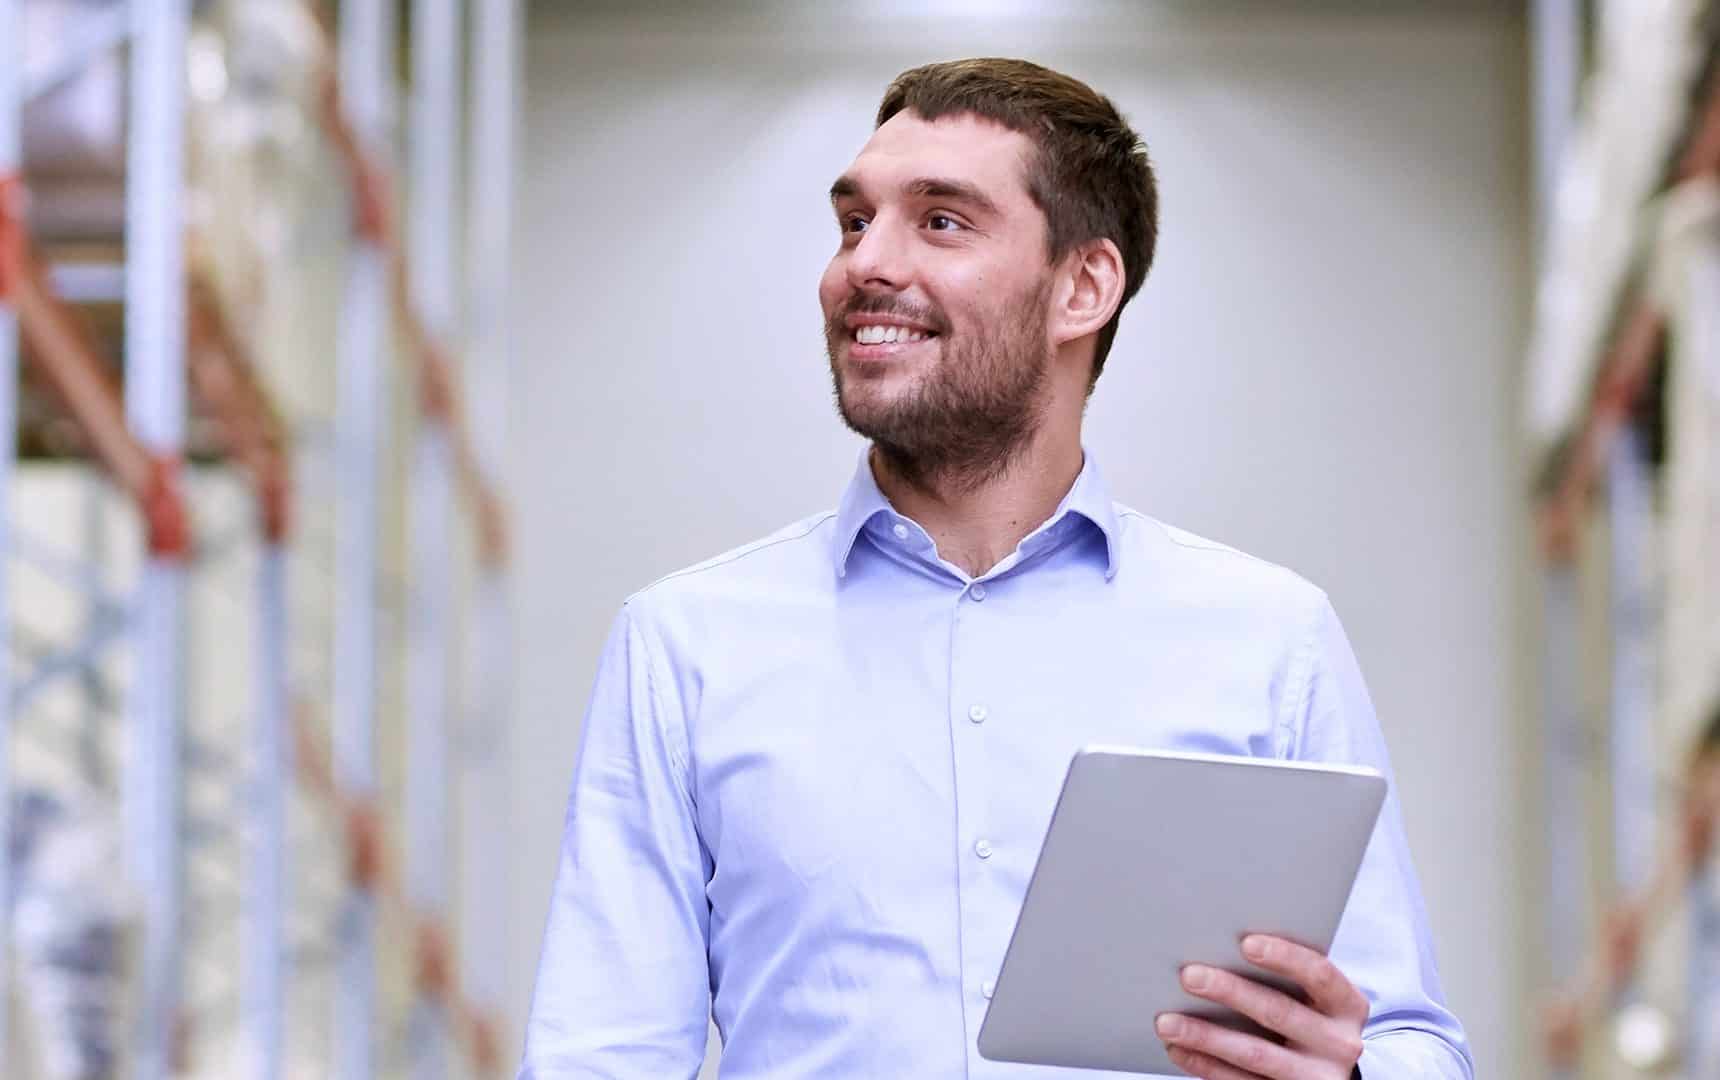 Man smiles while looking away from tablet